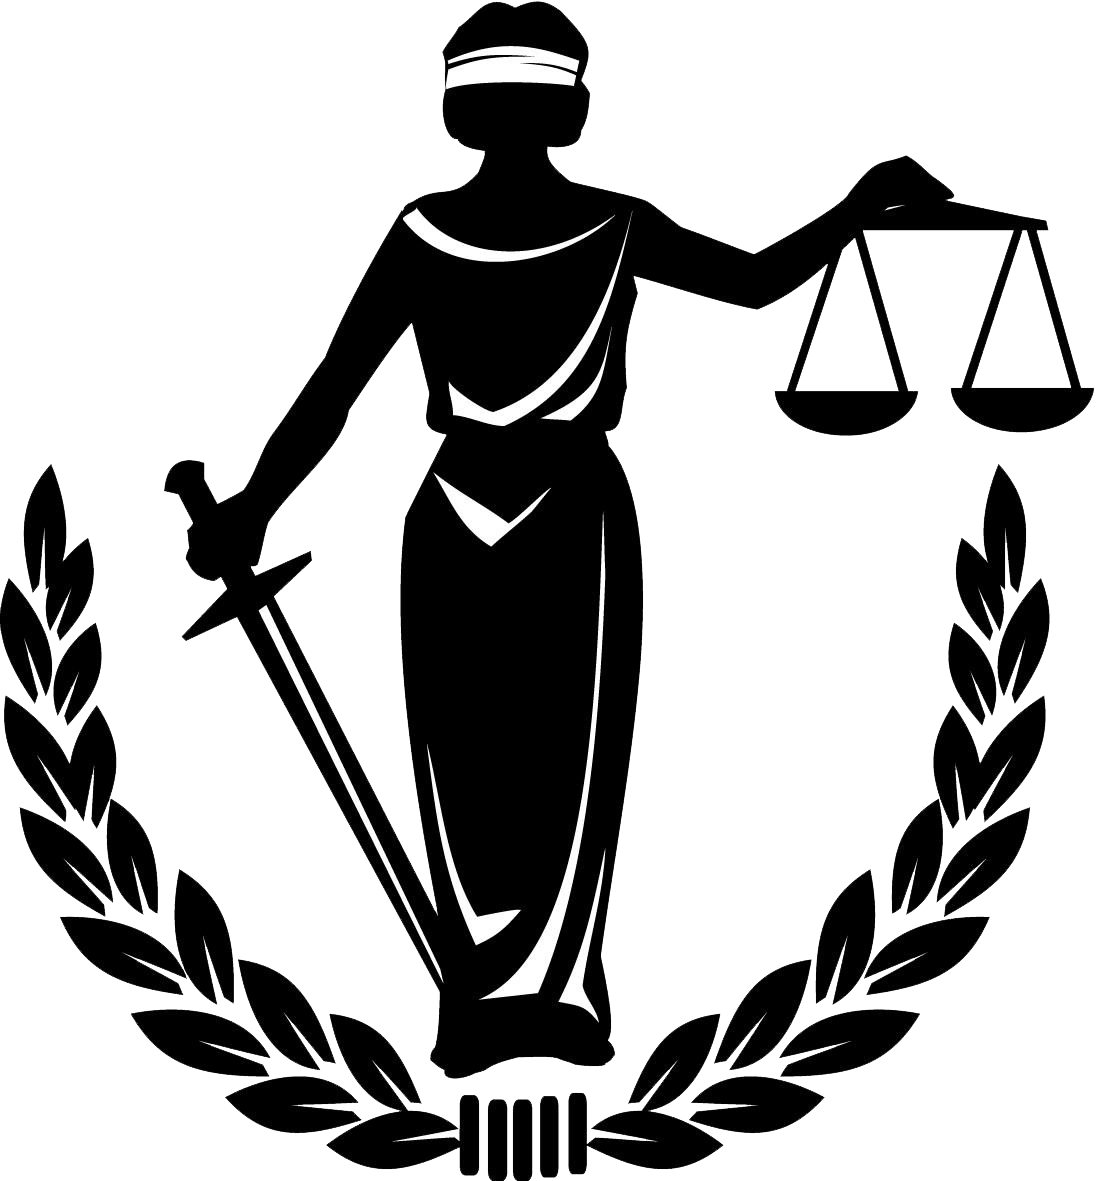 Lady Justice Measuring Scales Clip Art - Lady Justice Measuring Scales Clip Art (1096x1181)